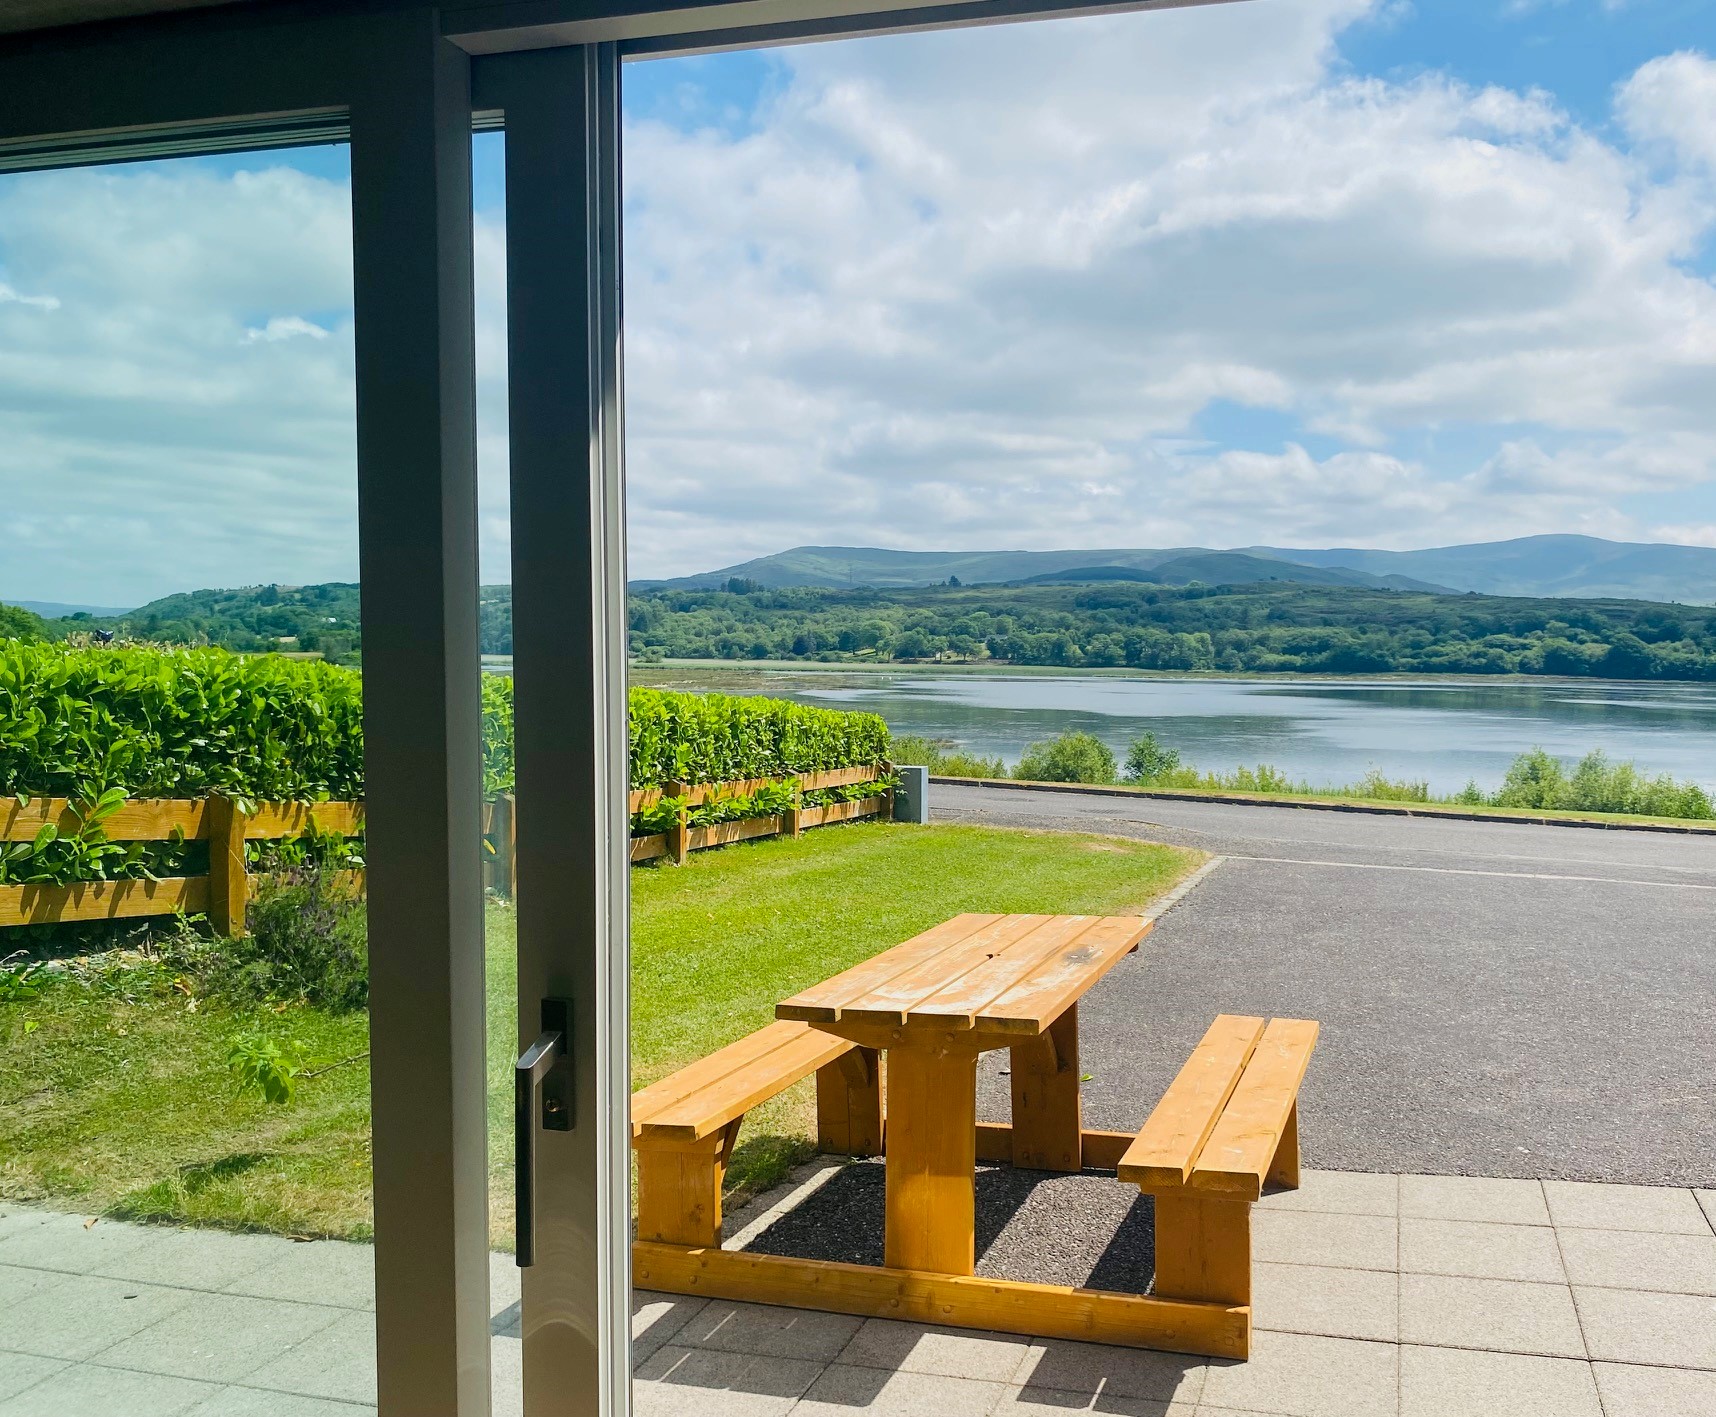 Property Image 2 - 3 bedroomed house with view of Kenmare Bay Estuary